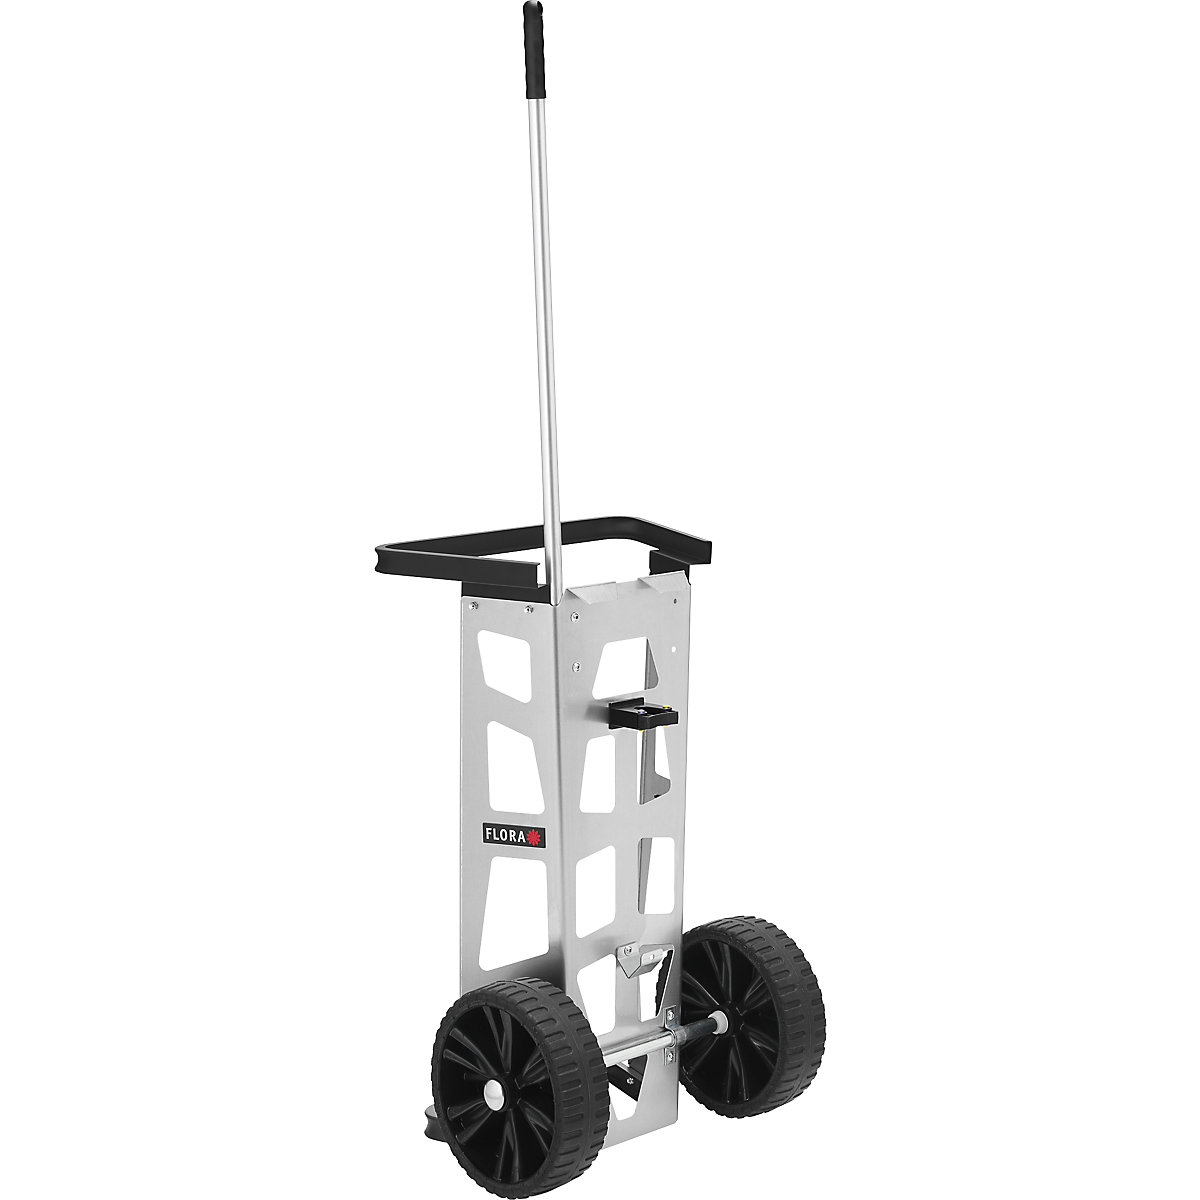 EASY waste collection trolley – FLORA, for outdoor areas, with puncture-proof tyres-2